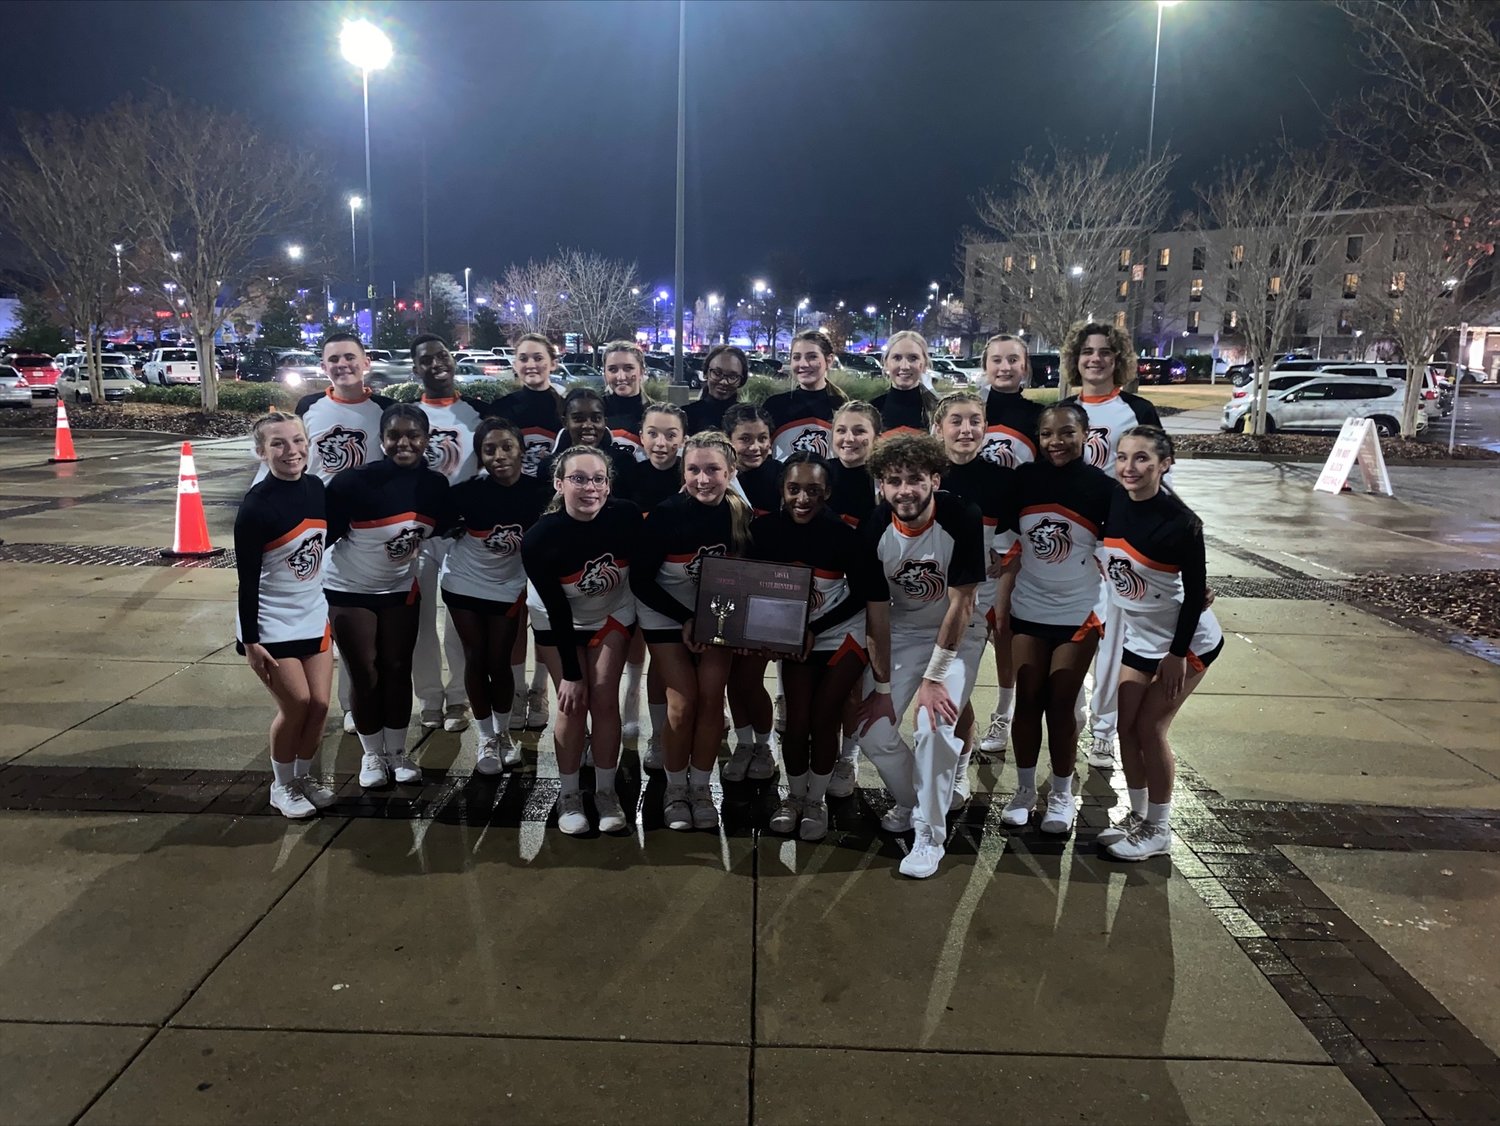 The Baldwin County High School cheerleading team finished second in the varsity coed division of the Alabama High School Athletic Association’s state championship meet Monday, Dec. 5, for its first top-two finish in school history.